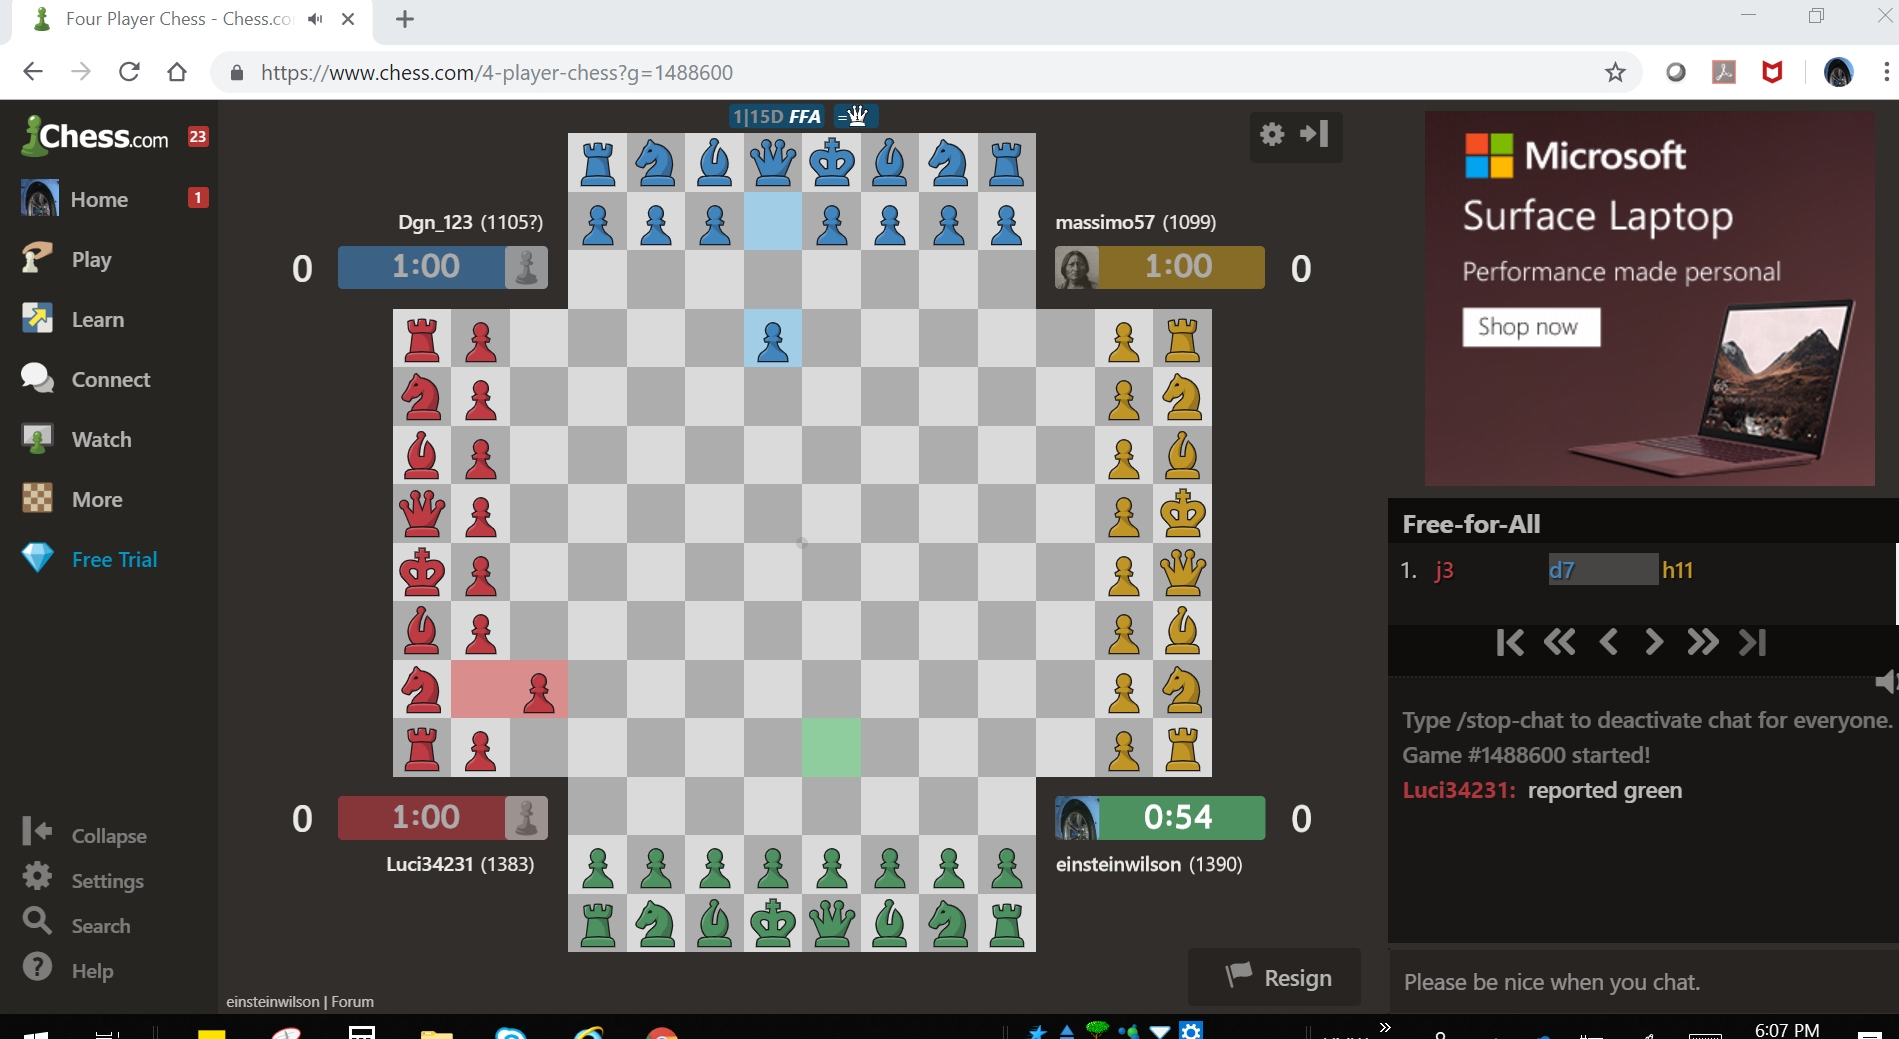 how does my online chess rating compare to real tournament